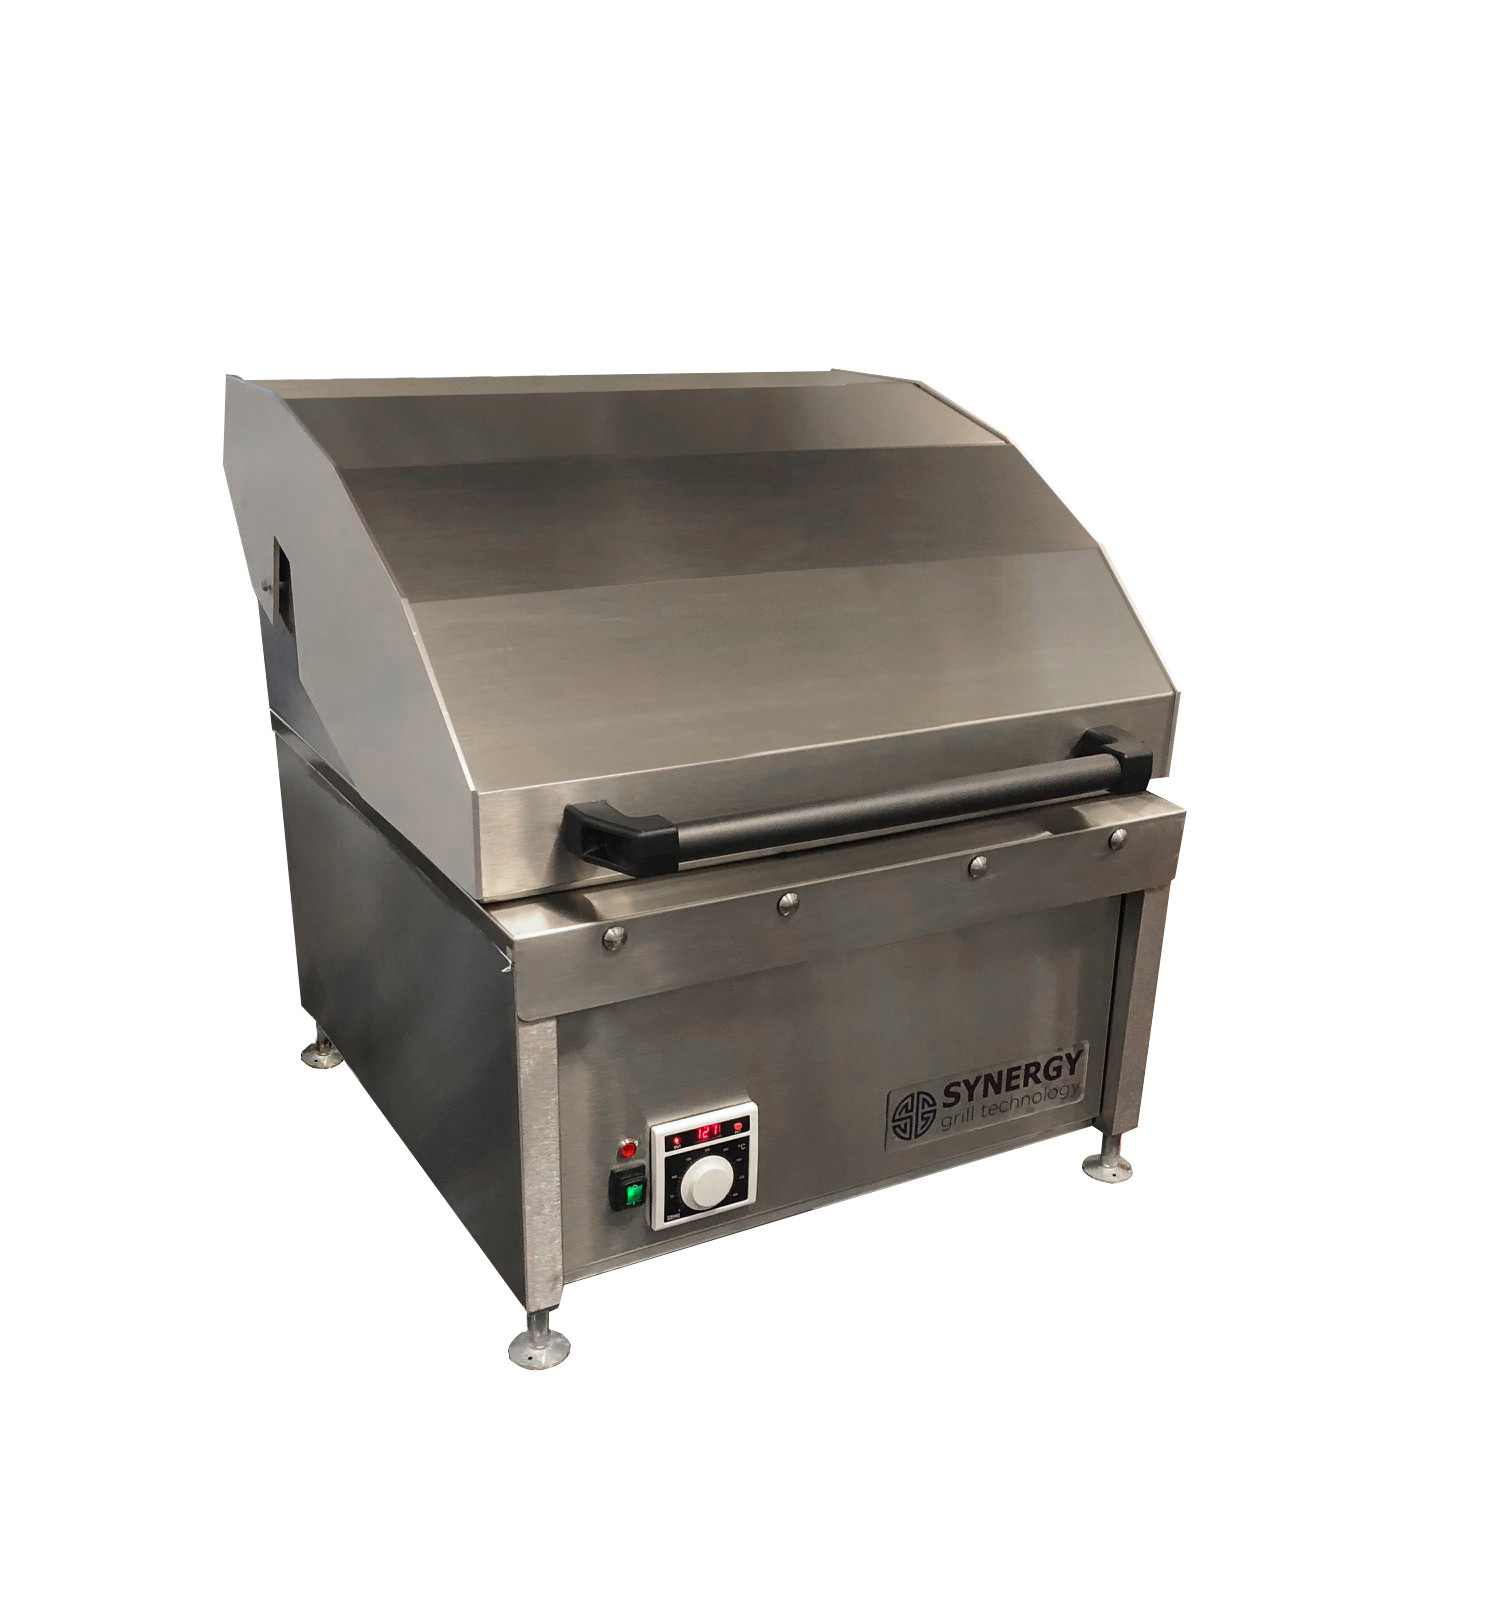 CGO630 Chargrill Oven